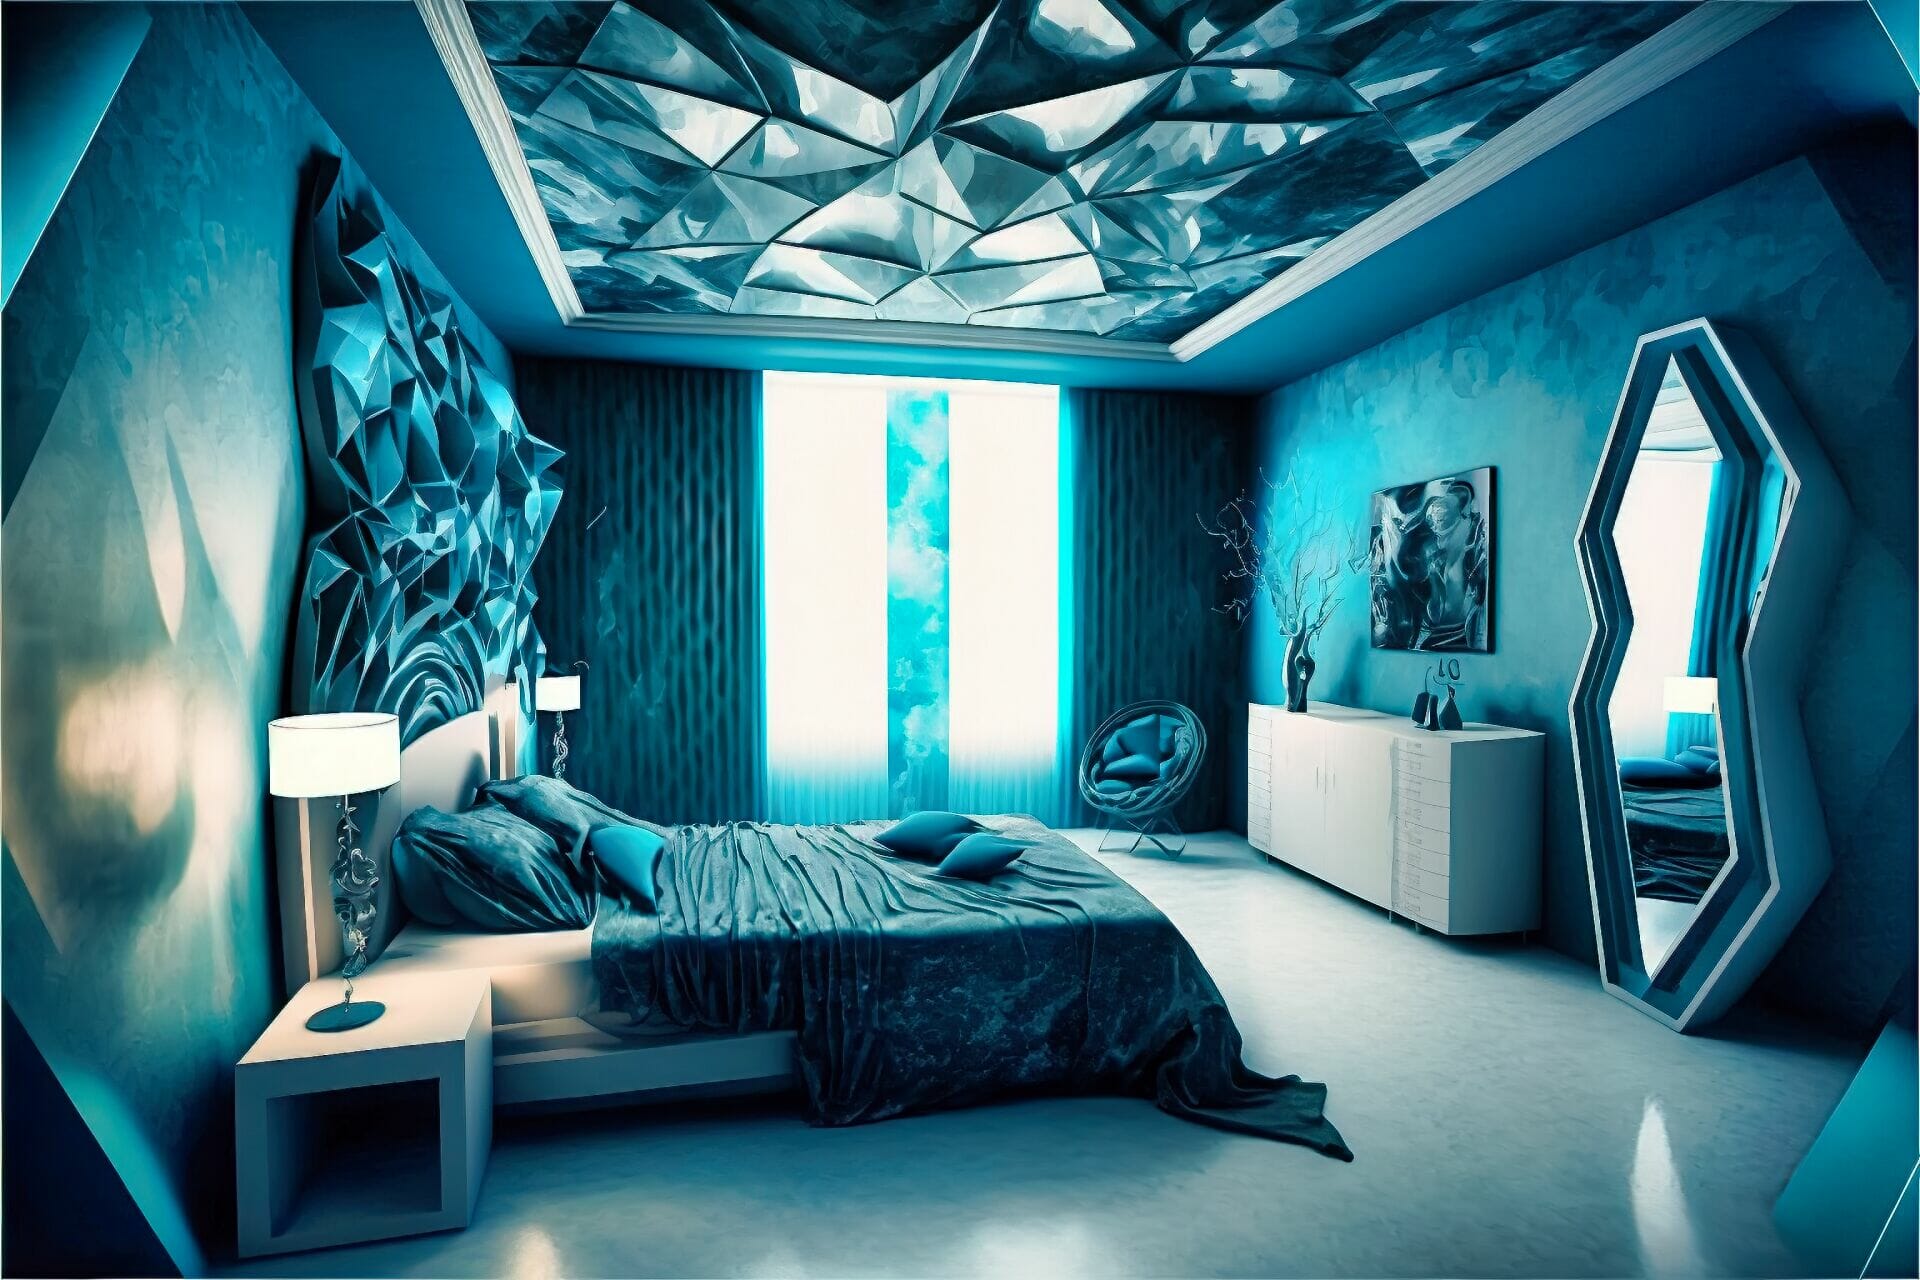 Futuristic Style Bedroom With A Futuristic Feel: This Bedroom Features A Futuristic Feel, With Its Bold Walls And Furniture Pieces In Shades Of Blue And Silver. A Variety Of Holographic Accents Add To The Look, While The Ceiling Is Painted A Deep Blue Hue.